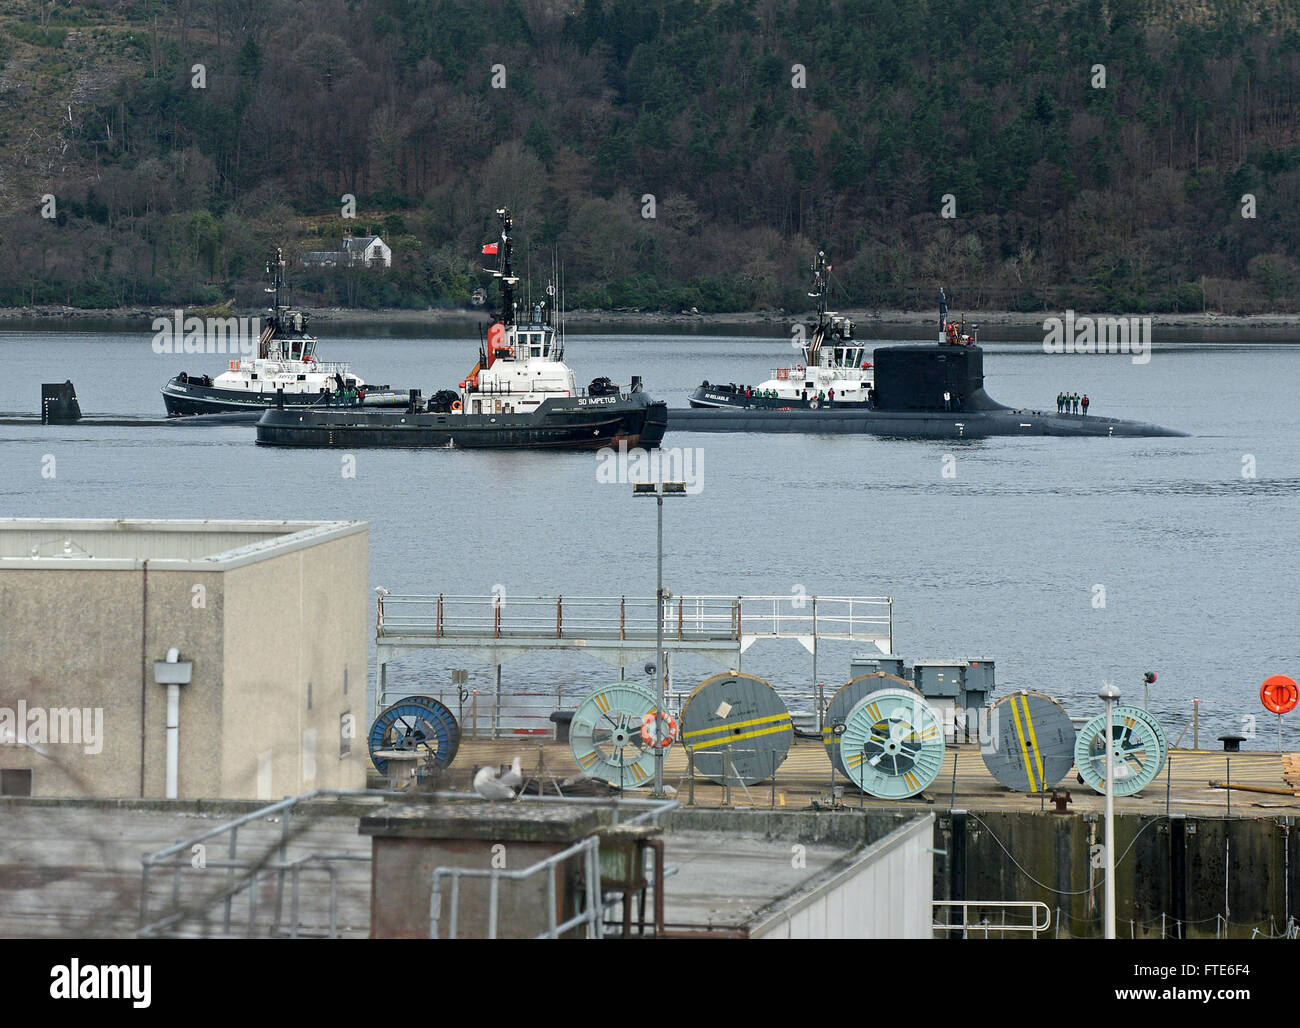 160322-N-ZZ999-009 FASLANE, United Kingdom (March 22, 2016) The Virginia-class attack submarine USS Virginia (SSN 774) arrives at Her Majesty's Naval Base, Clyde for a scheduled port visit March 22, 2016. Virginia is conducting naval operations in the U.S. 6th Fleet area of operations in support of U.S. national security interests in Europe. (Photo courtesy of Royal Navy/Released) Stock Photo